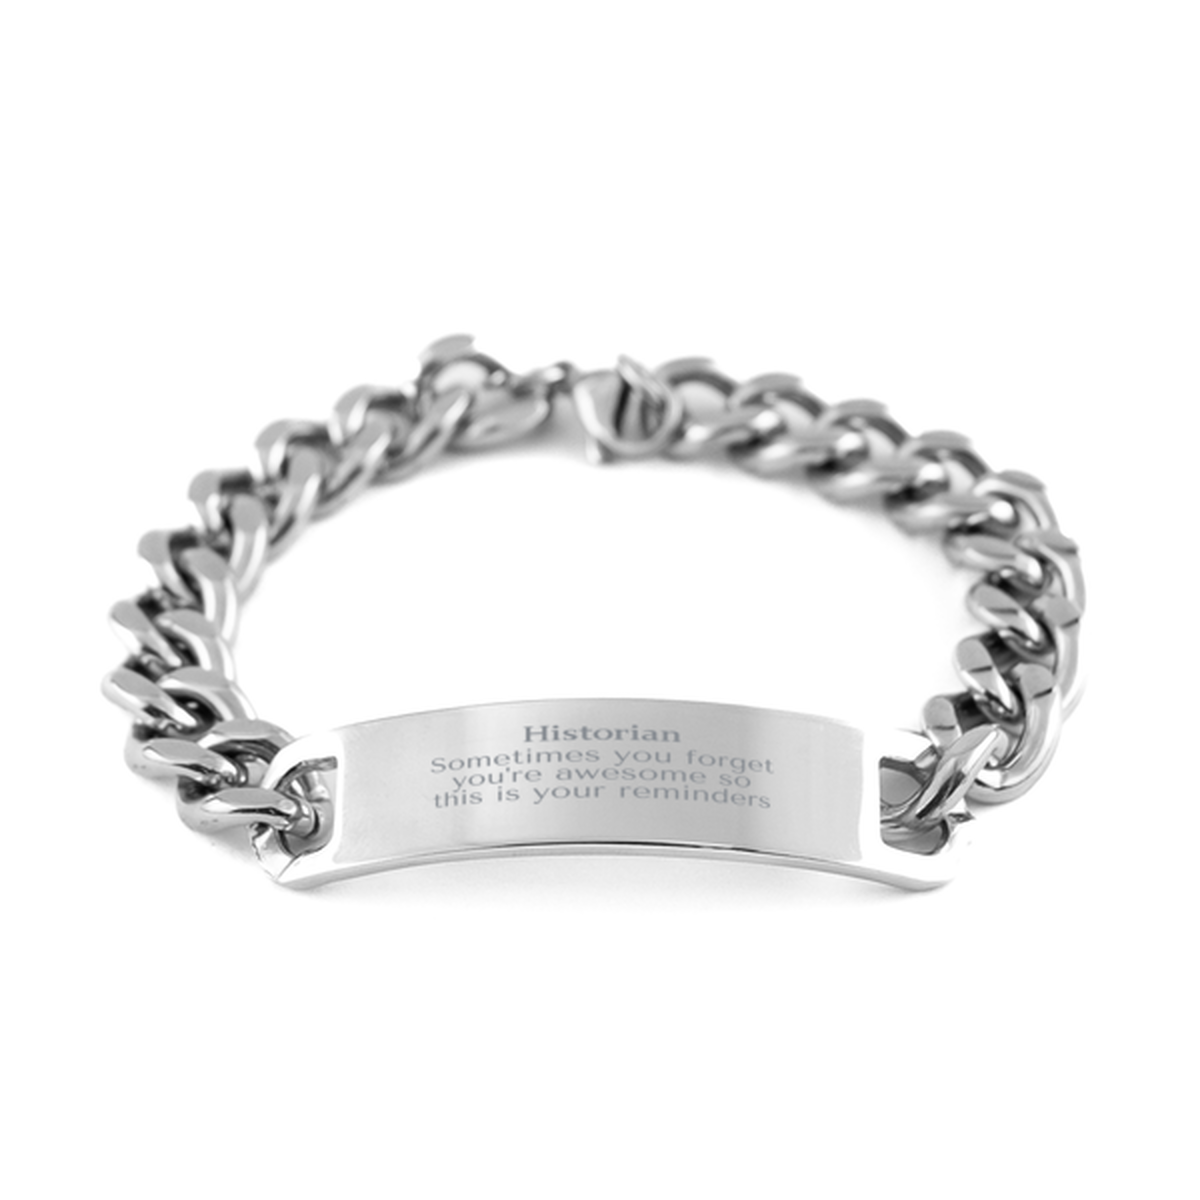 Sentimental Historian Cuban Chain Stainless Steel Bracelet, Historian Sometimes you forget you're awesome so this is your reminders, Graduation Christmas Birthday Gifts for Historian, Men, Women, Coworkers